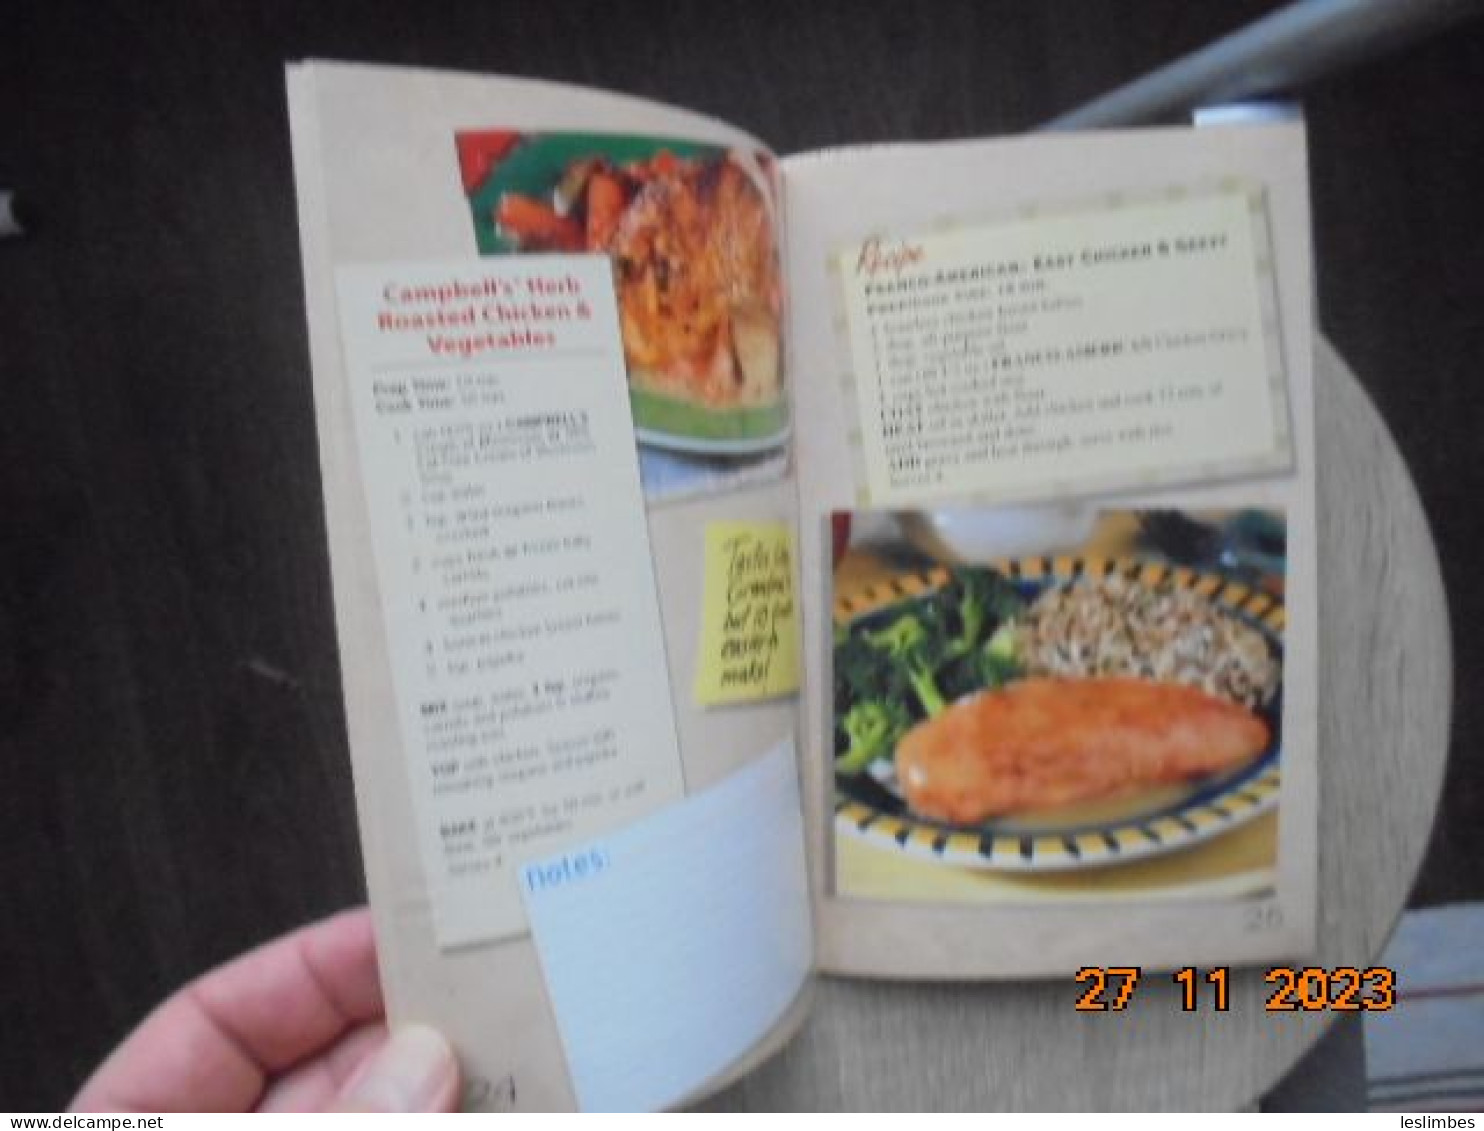 Campbell's Favorite Recipes From Our Family To Yours - Campbell Soup Company 2002 - Américaine